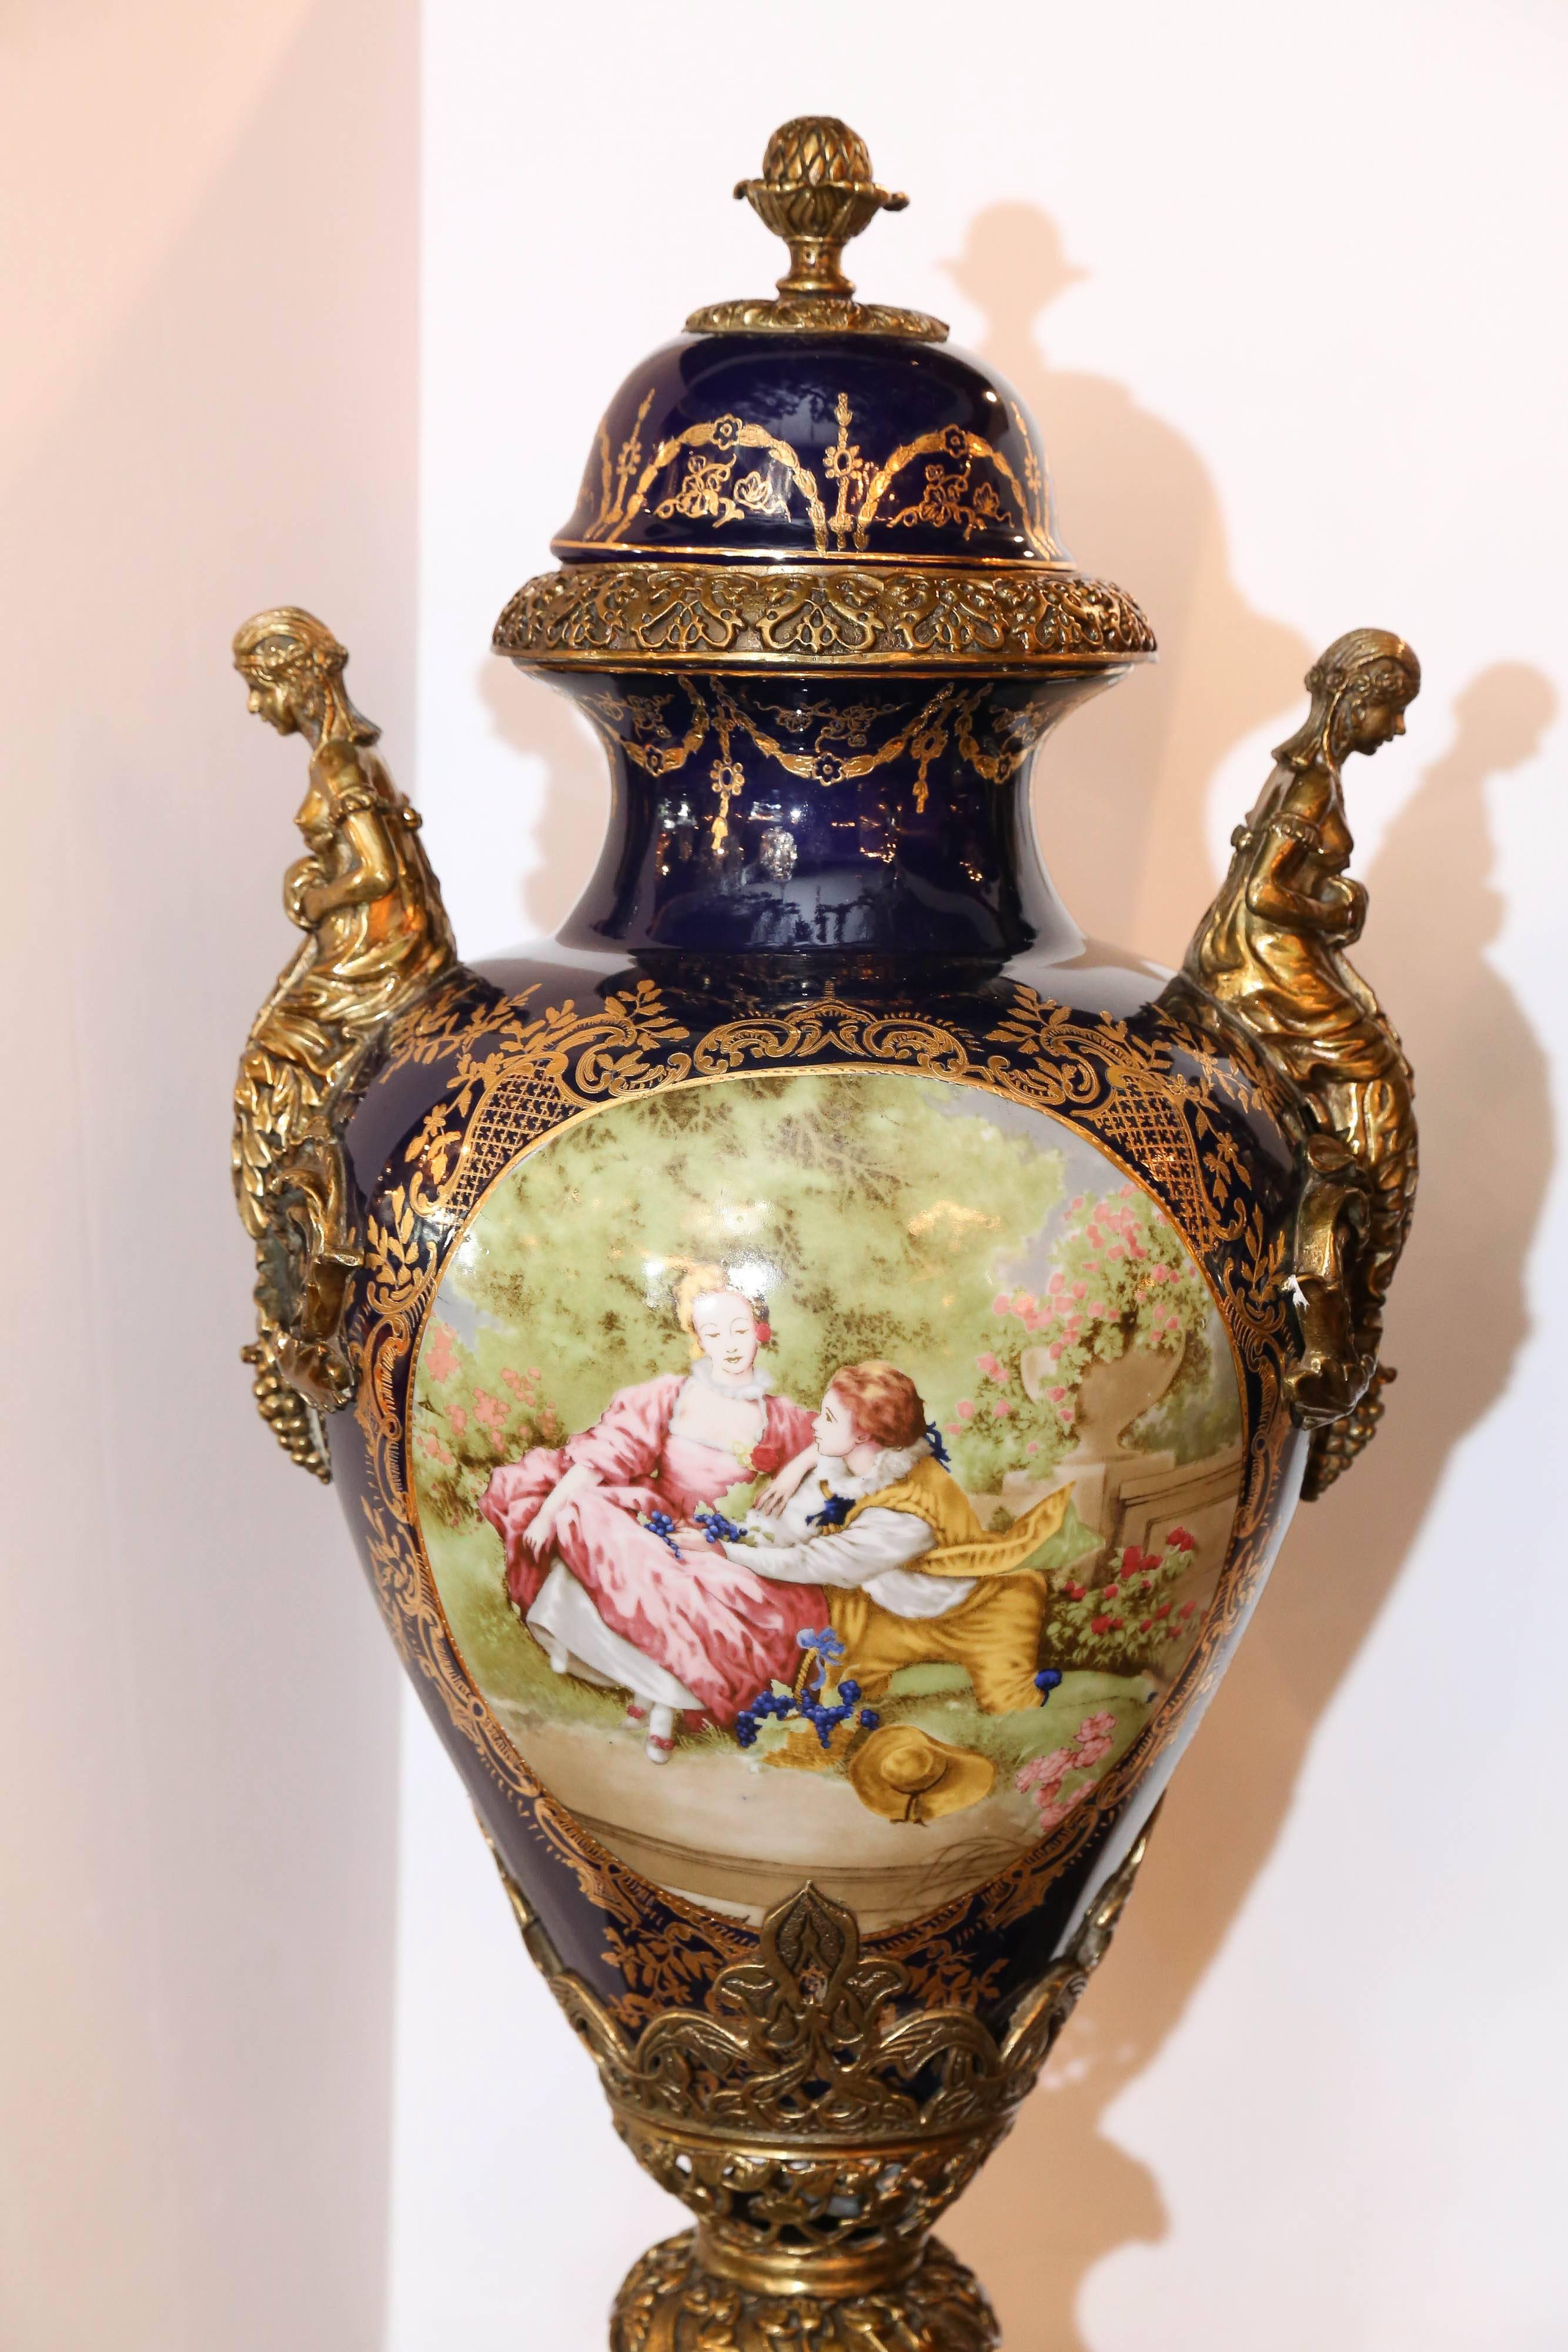 Pair of large urns decorated in cobalt blue and pale green colors
The cameo shaped front is decorated in a French garden scene
With a couple. The sides are decorated with a bronze-mounted
Woman on each side of the urn. They are mounted on a